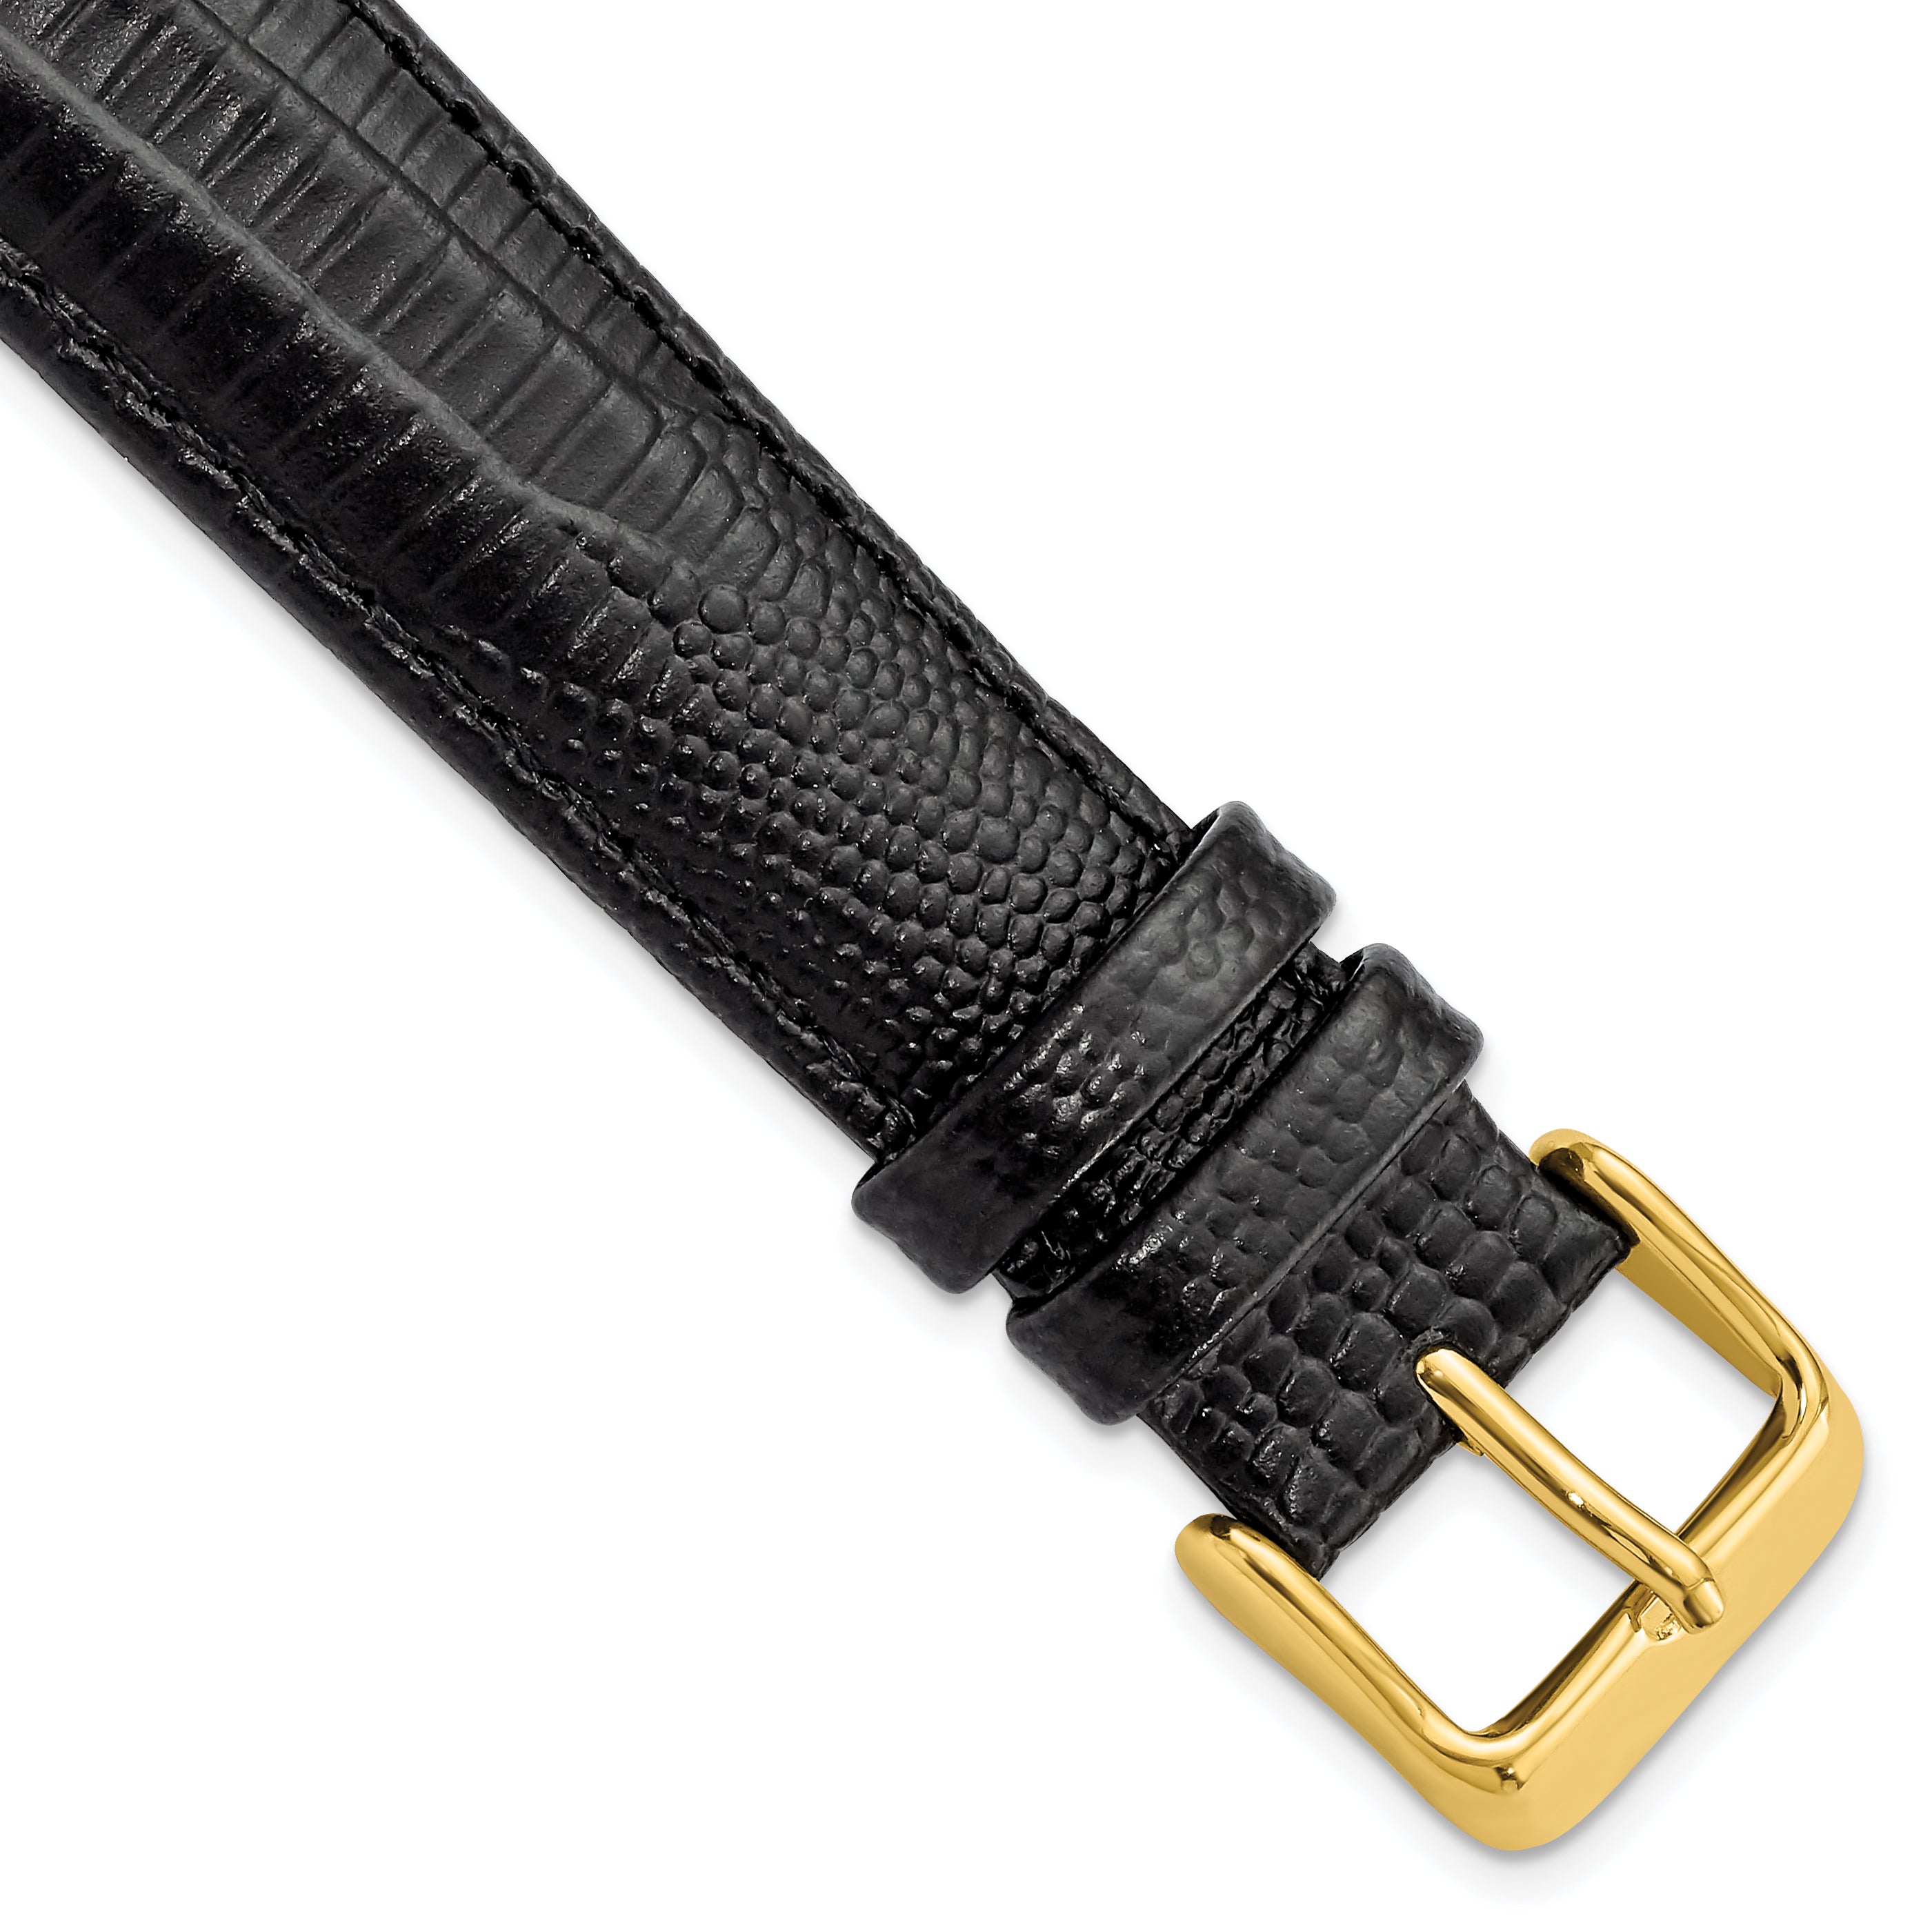 DeBeer 18mm Black Teju Liz Grain Leather with Gold-tone Buckle 7.5 inch Watch Band